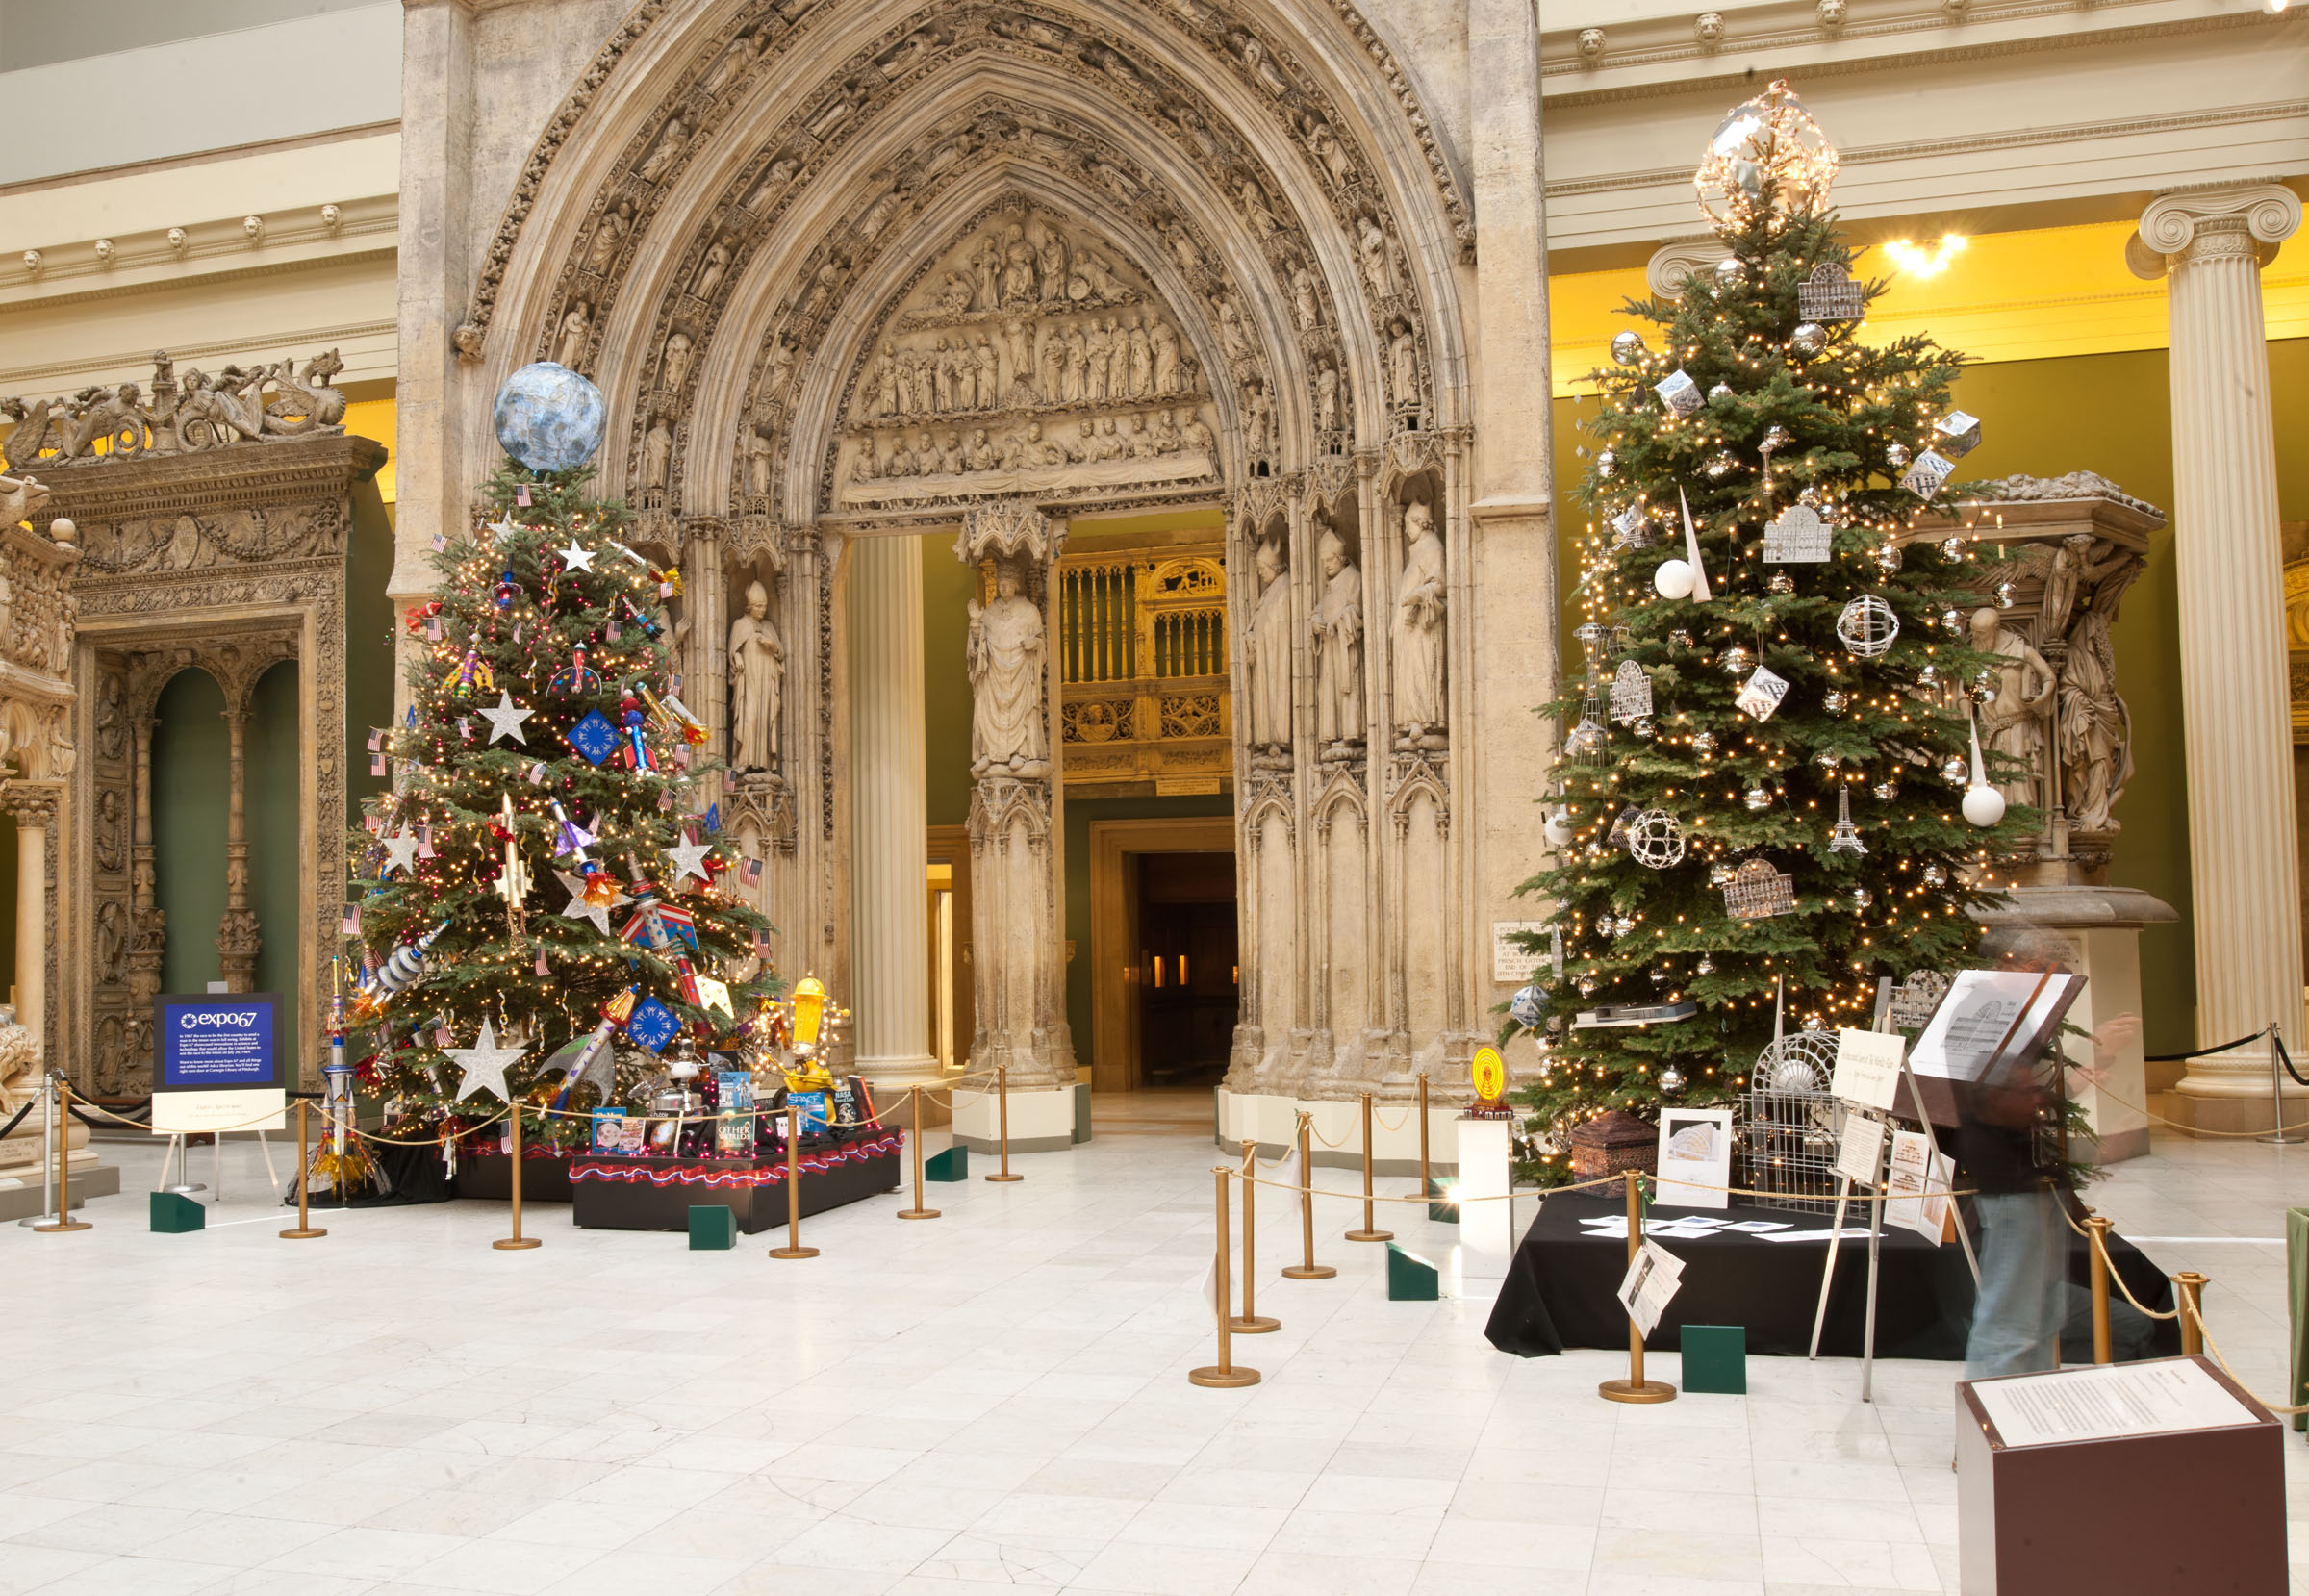 Two large Christmas trees in an ornate setting